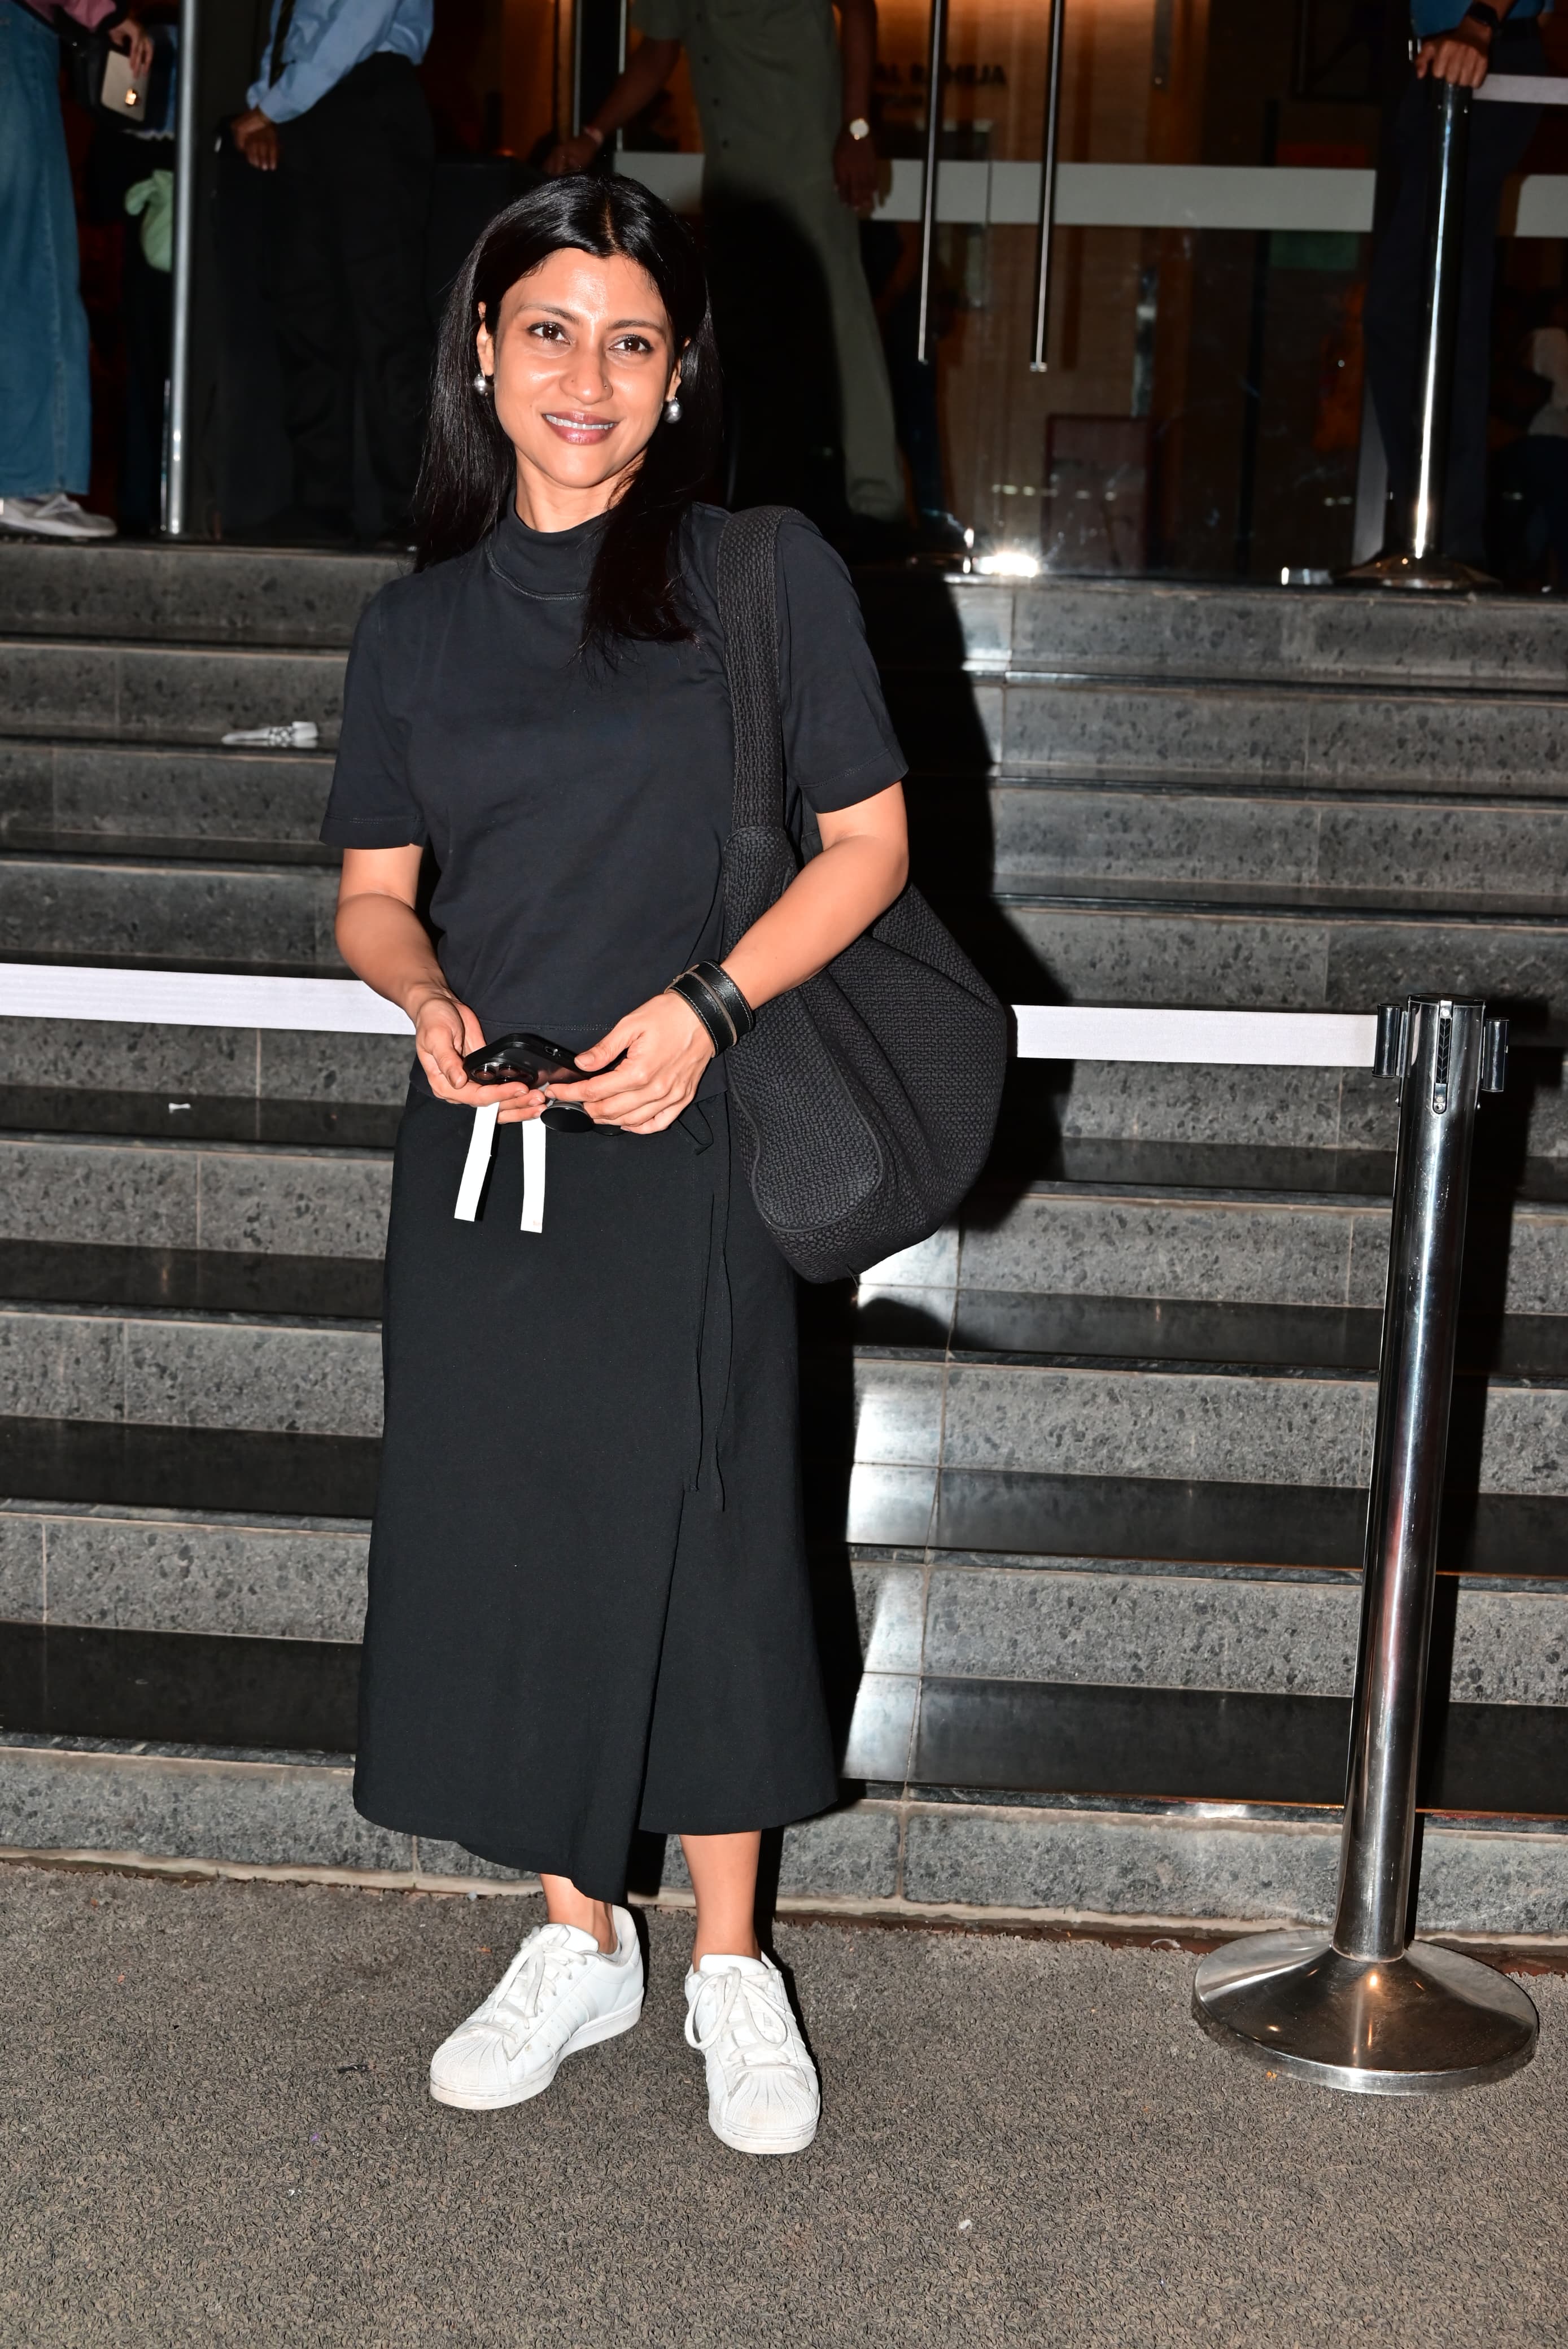 Konkana Sen Sharma wore an all-black outfit as she went out in the city